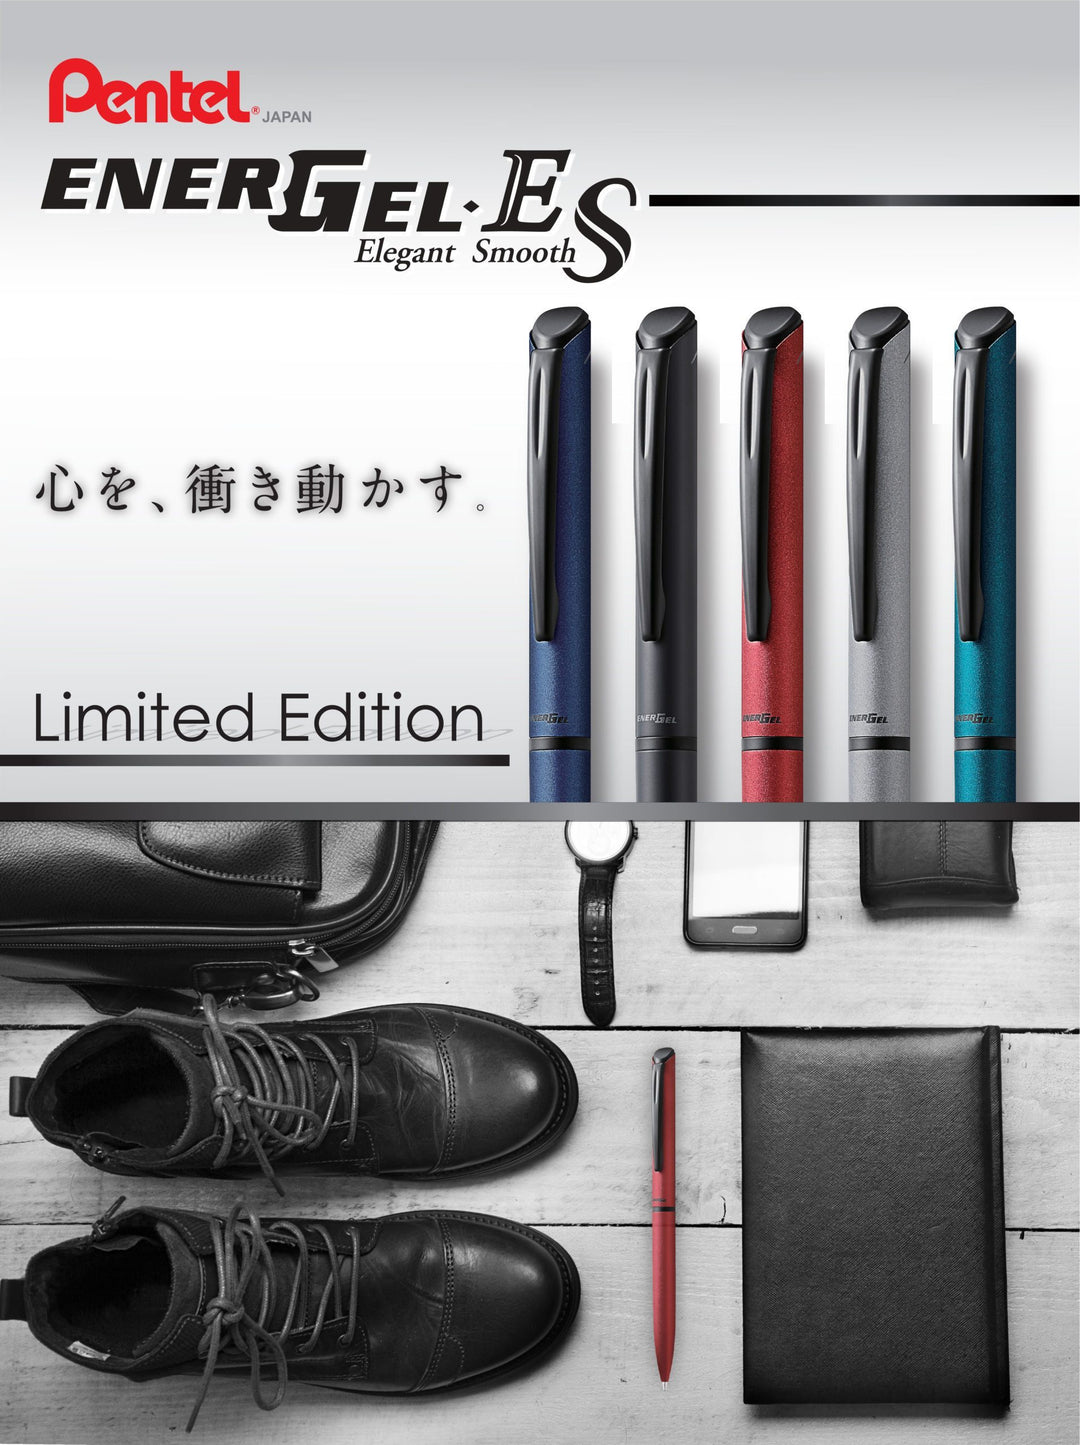 Pentel Sterling Energel Capless Rollerball Pen - Achromatic Matte Red (with LASER Engraving) - KSGILLS.com | The Writing Instruments Expert